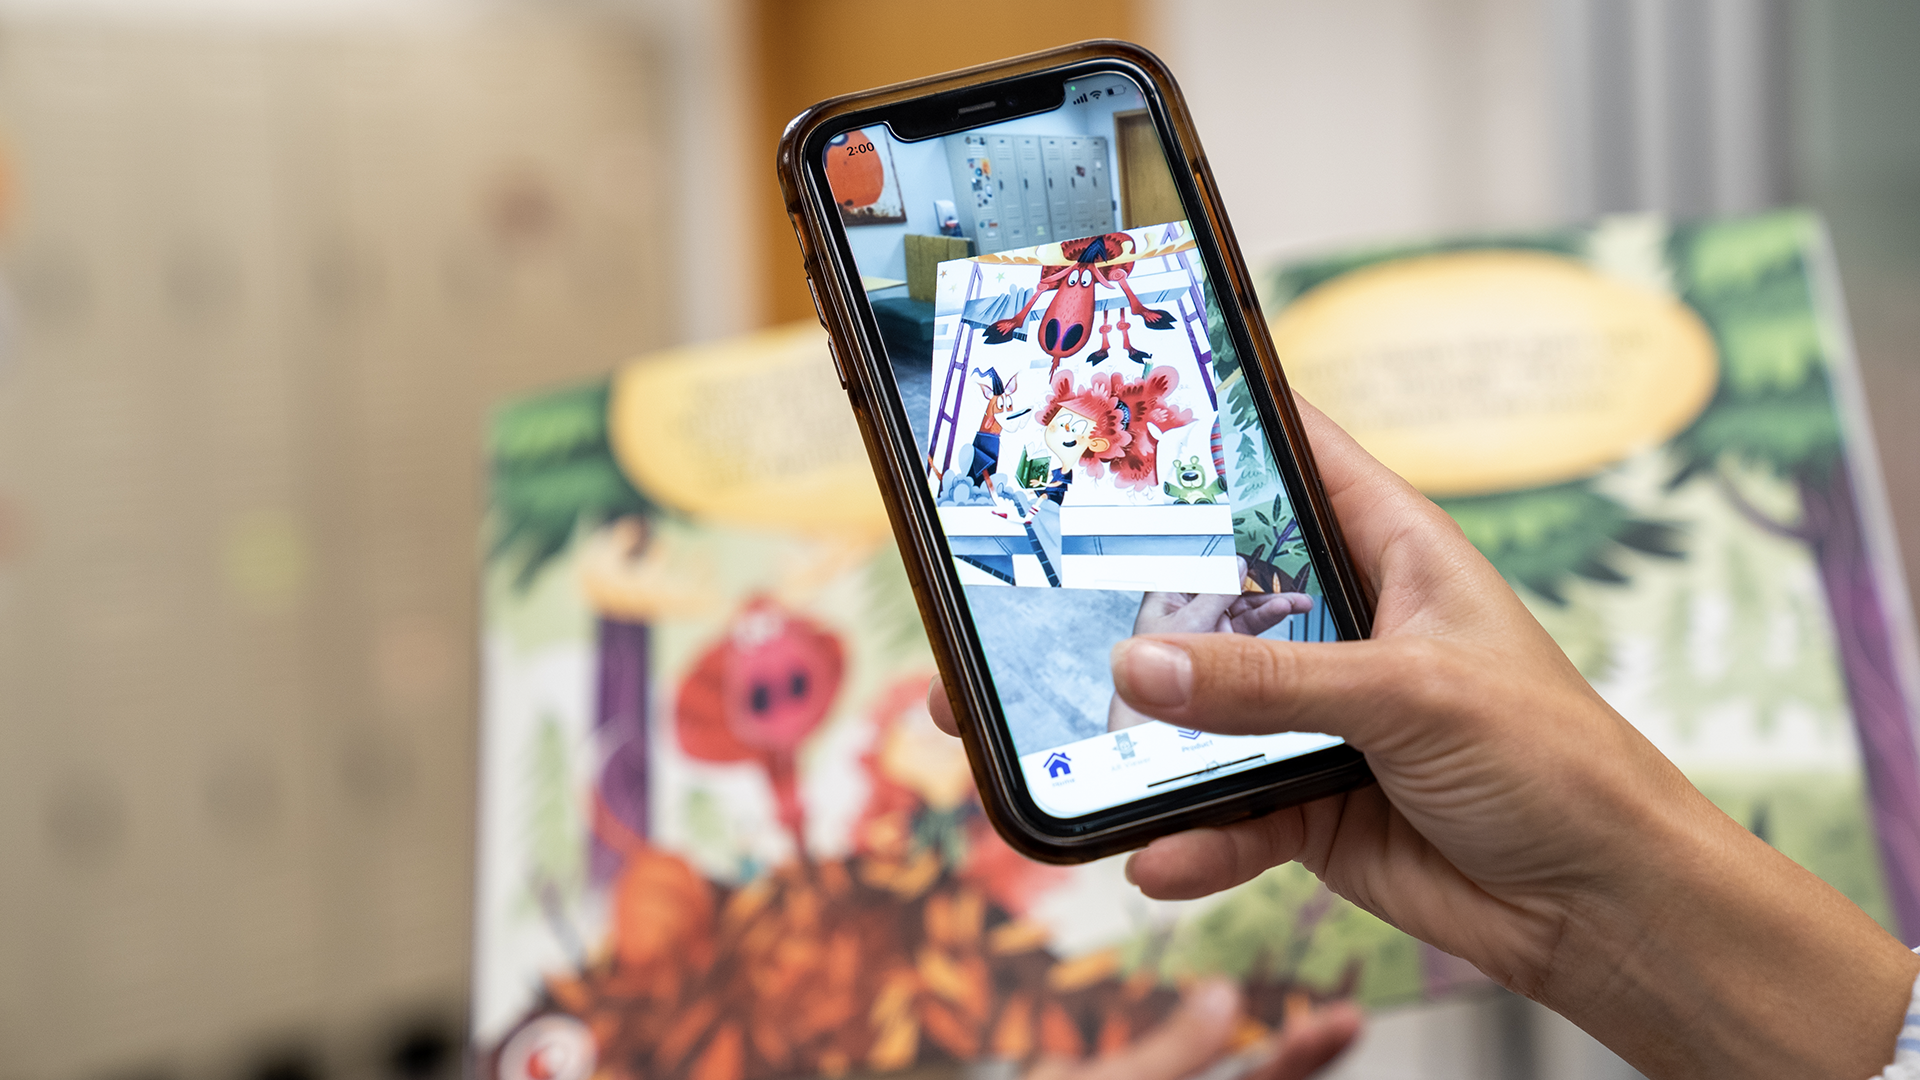 Project Spotlight: How Augmented Reality Let Fans of a Beloved Children’s Book Series Choose the Next Adventure